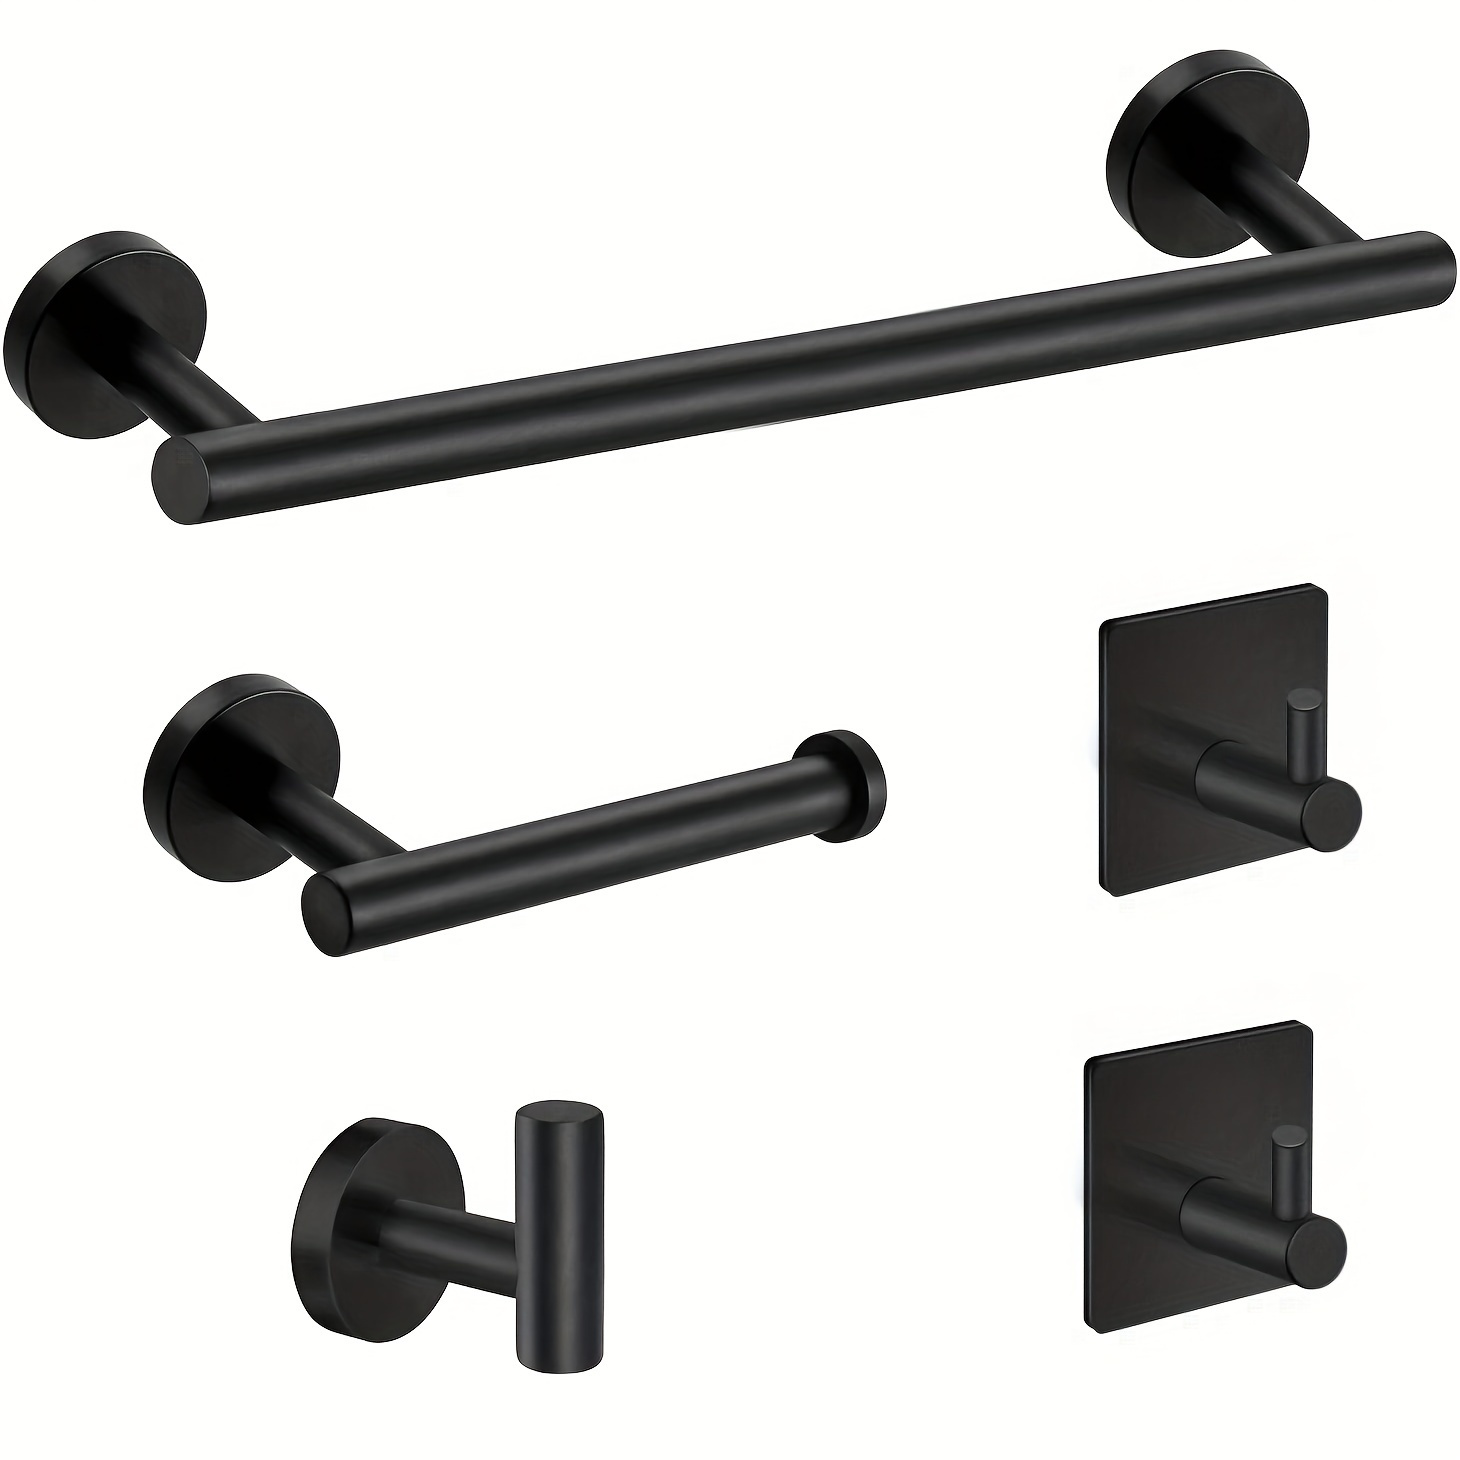 

5pcs Matte Black Bathroom Hardware Set, Stainless Steel Round Wall Mounted, Includes 16" Hand Towel Bar, Toilet Paper Holder, 3 Robe Towel Hooks, Bathroom Accessories Kit